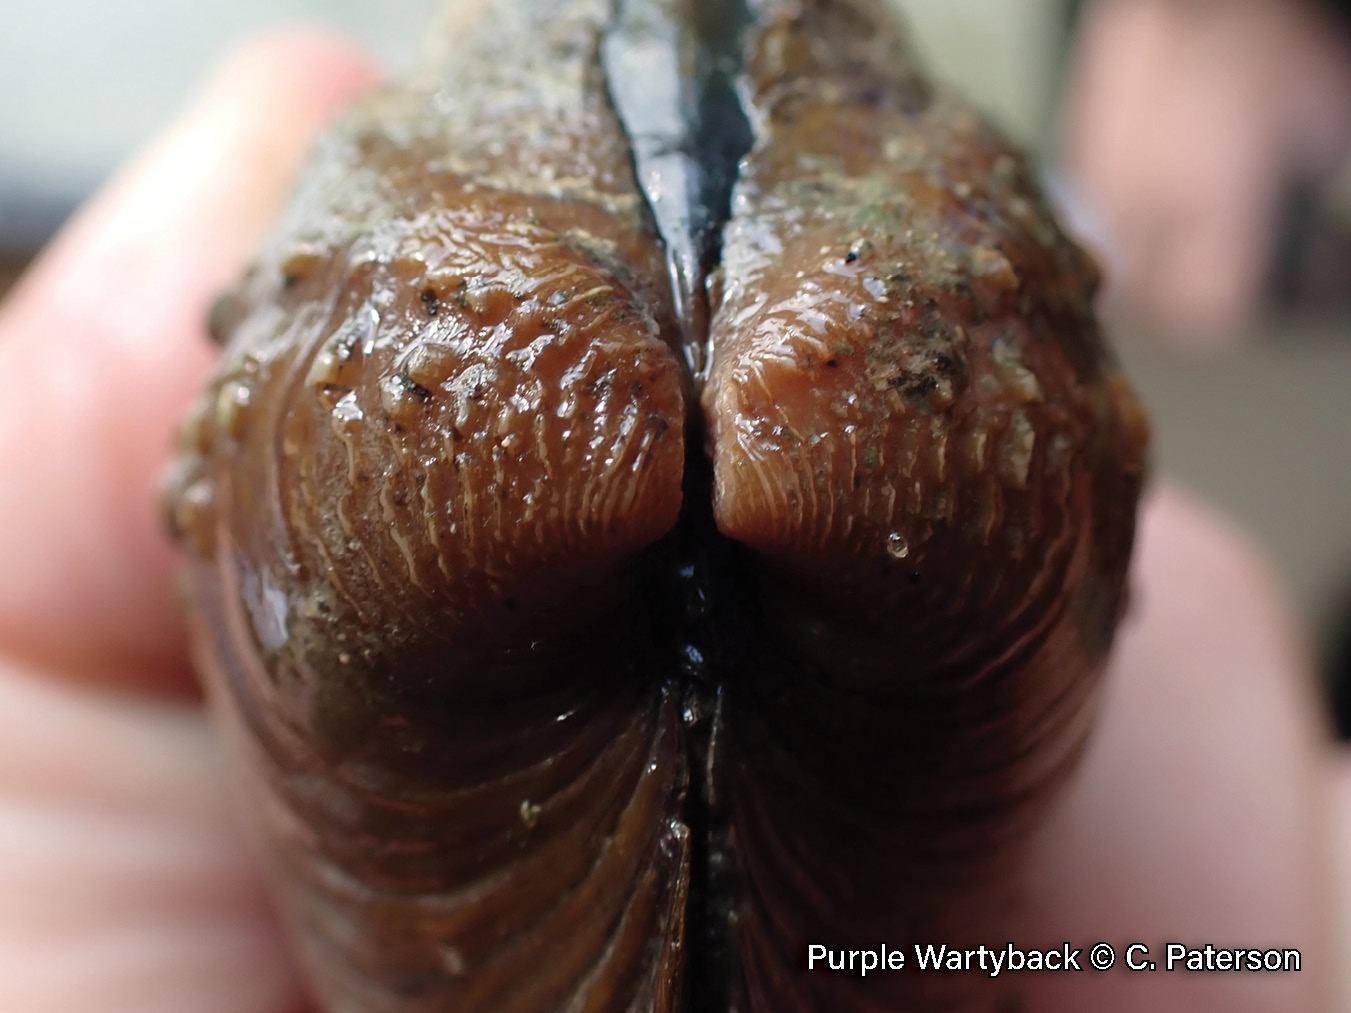 Picture of the beak structure of a purple wartyback mussel in a hand, a rich brown, medium-sized mussel that is covered in bumps. Its beak is covered in a series of fine zigzag ridges.